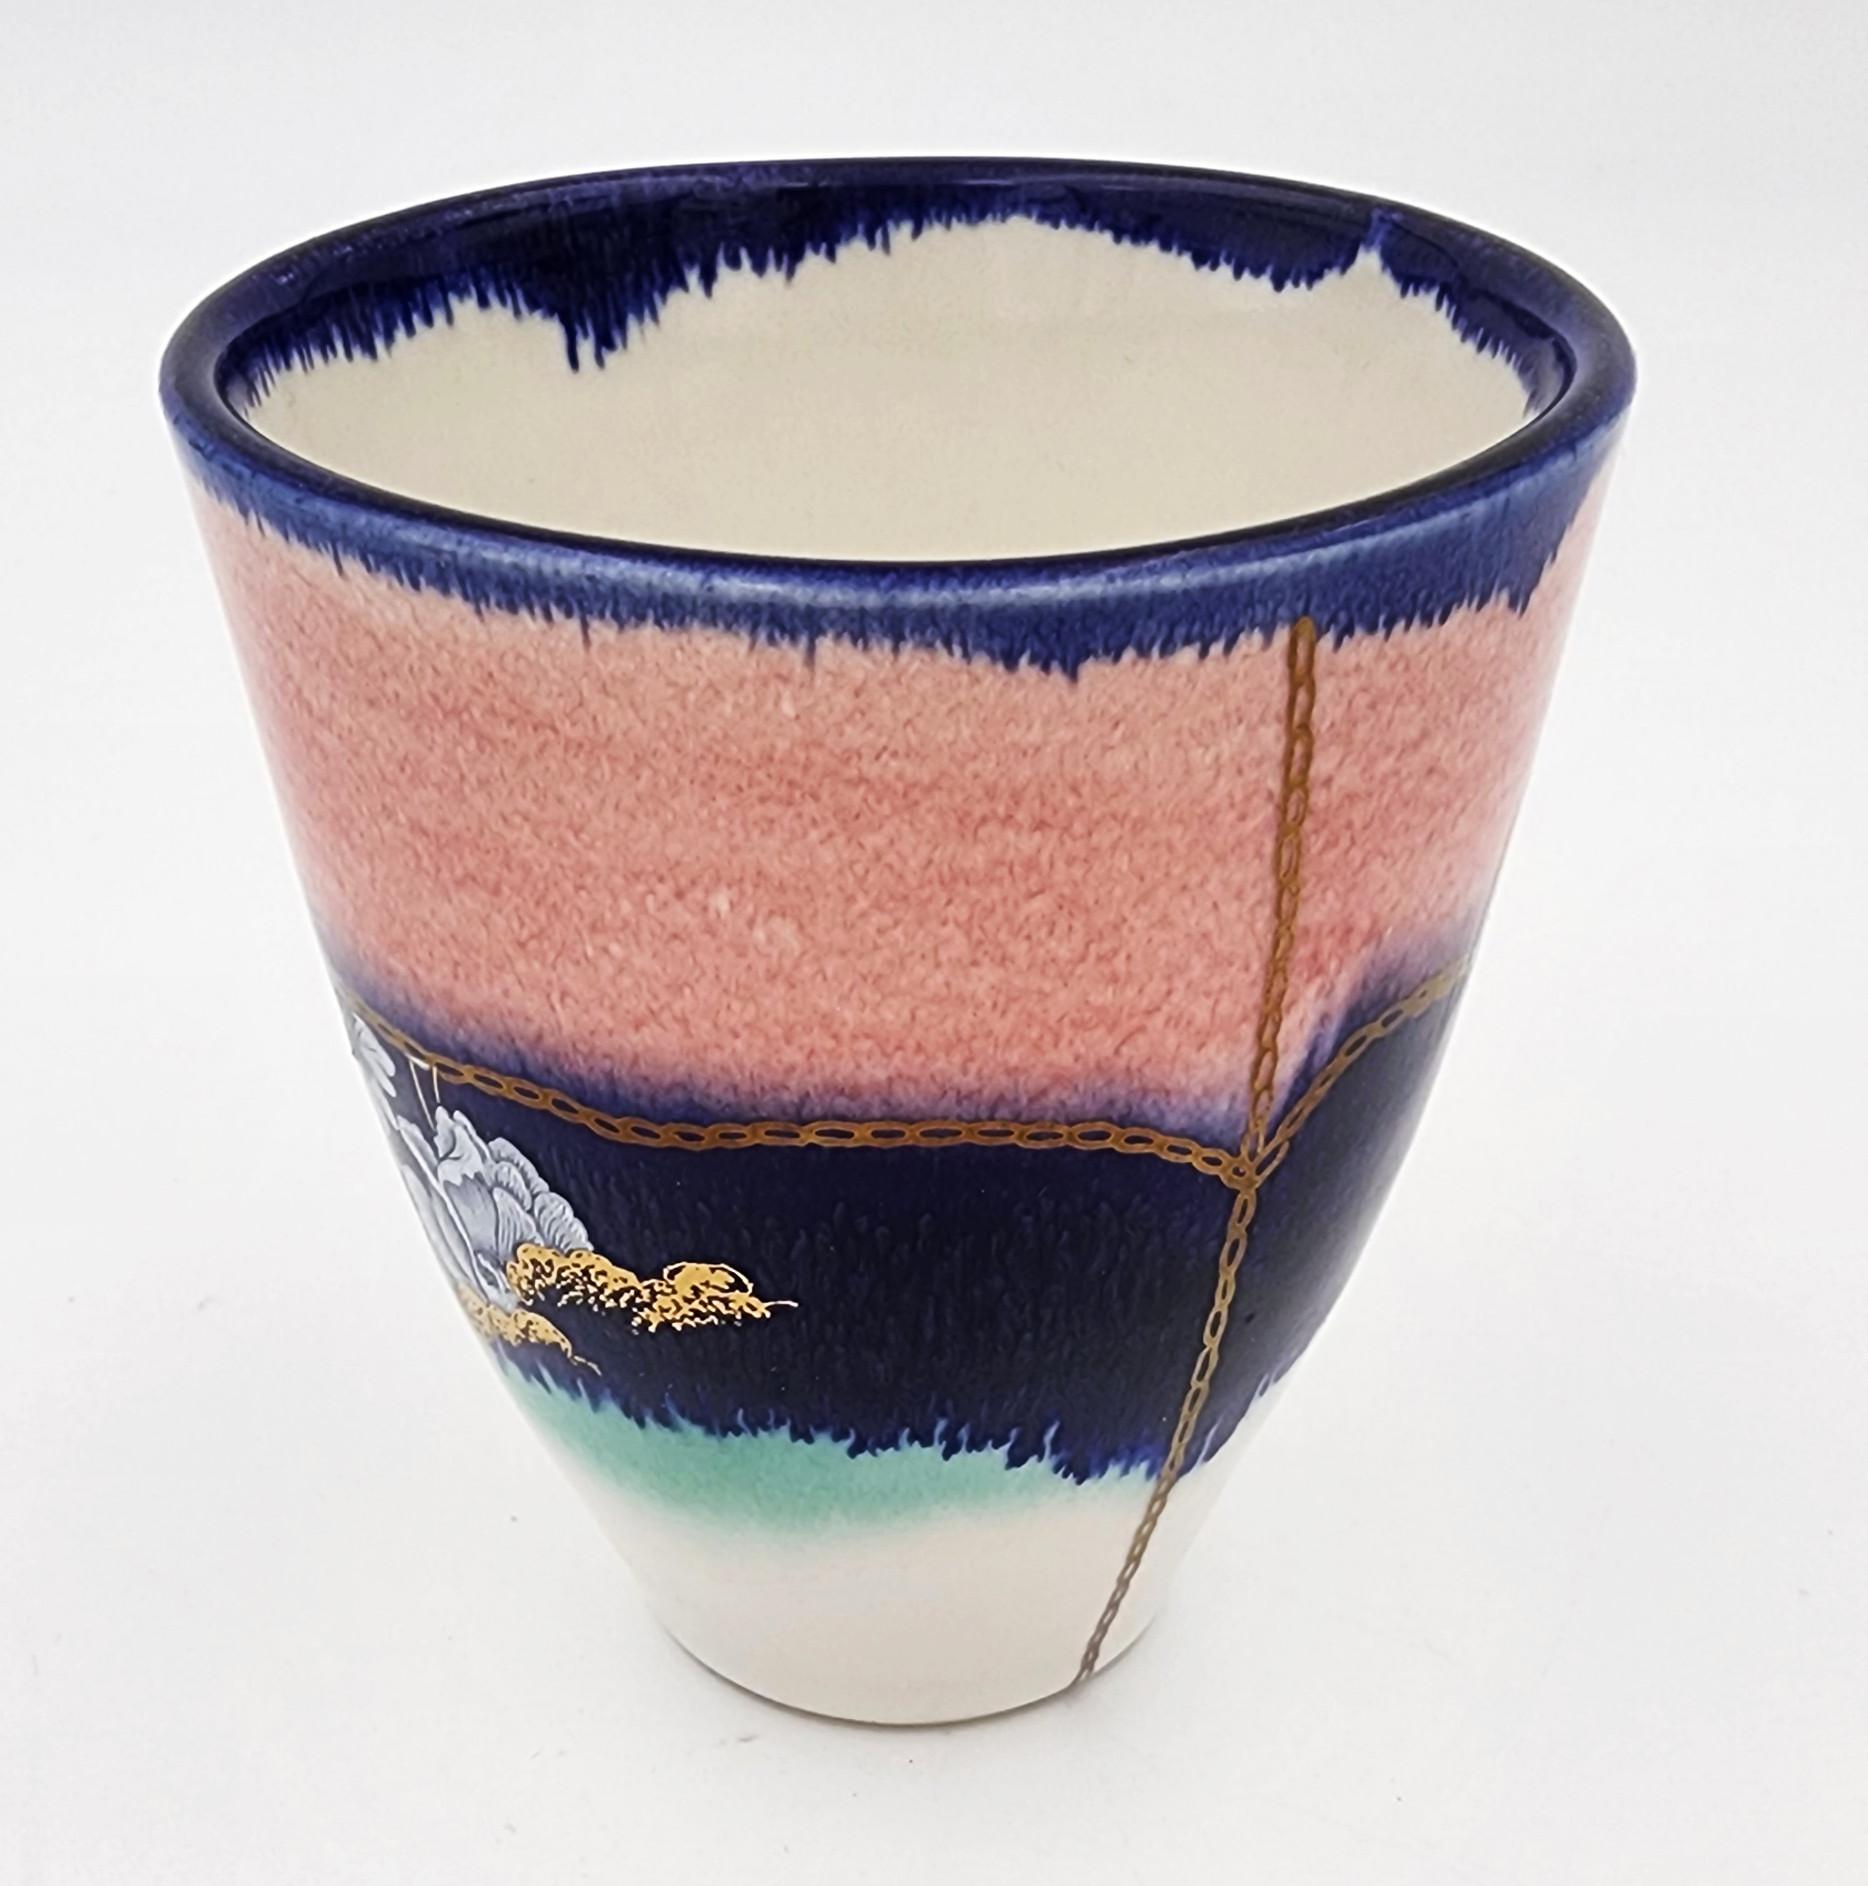 Melanie Sherman
Cup with Patterns II (Hand-Painted, Gold Luster)
Porcelain, Glaze, Porcelain Paint, Hand-made Vintage Decals, Gold Luster, Platinum Luster
Year: 2022
Size: 3x3.25x3.25in
Signed by hand
COA provided
Ref.: 24802-1738

Tags: Flowers,